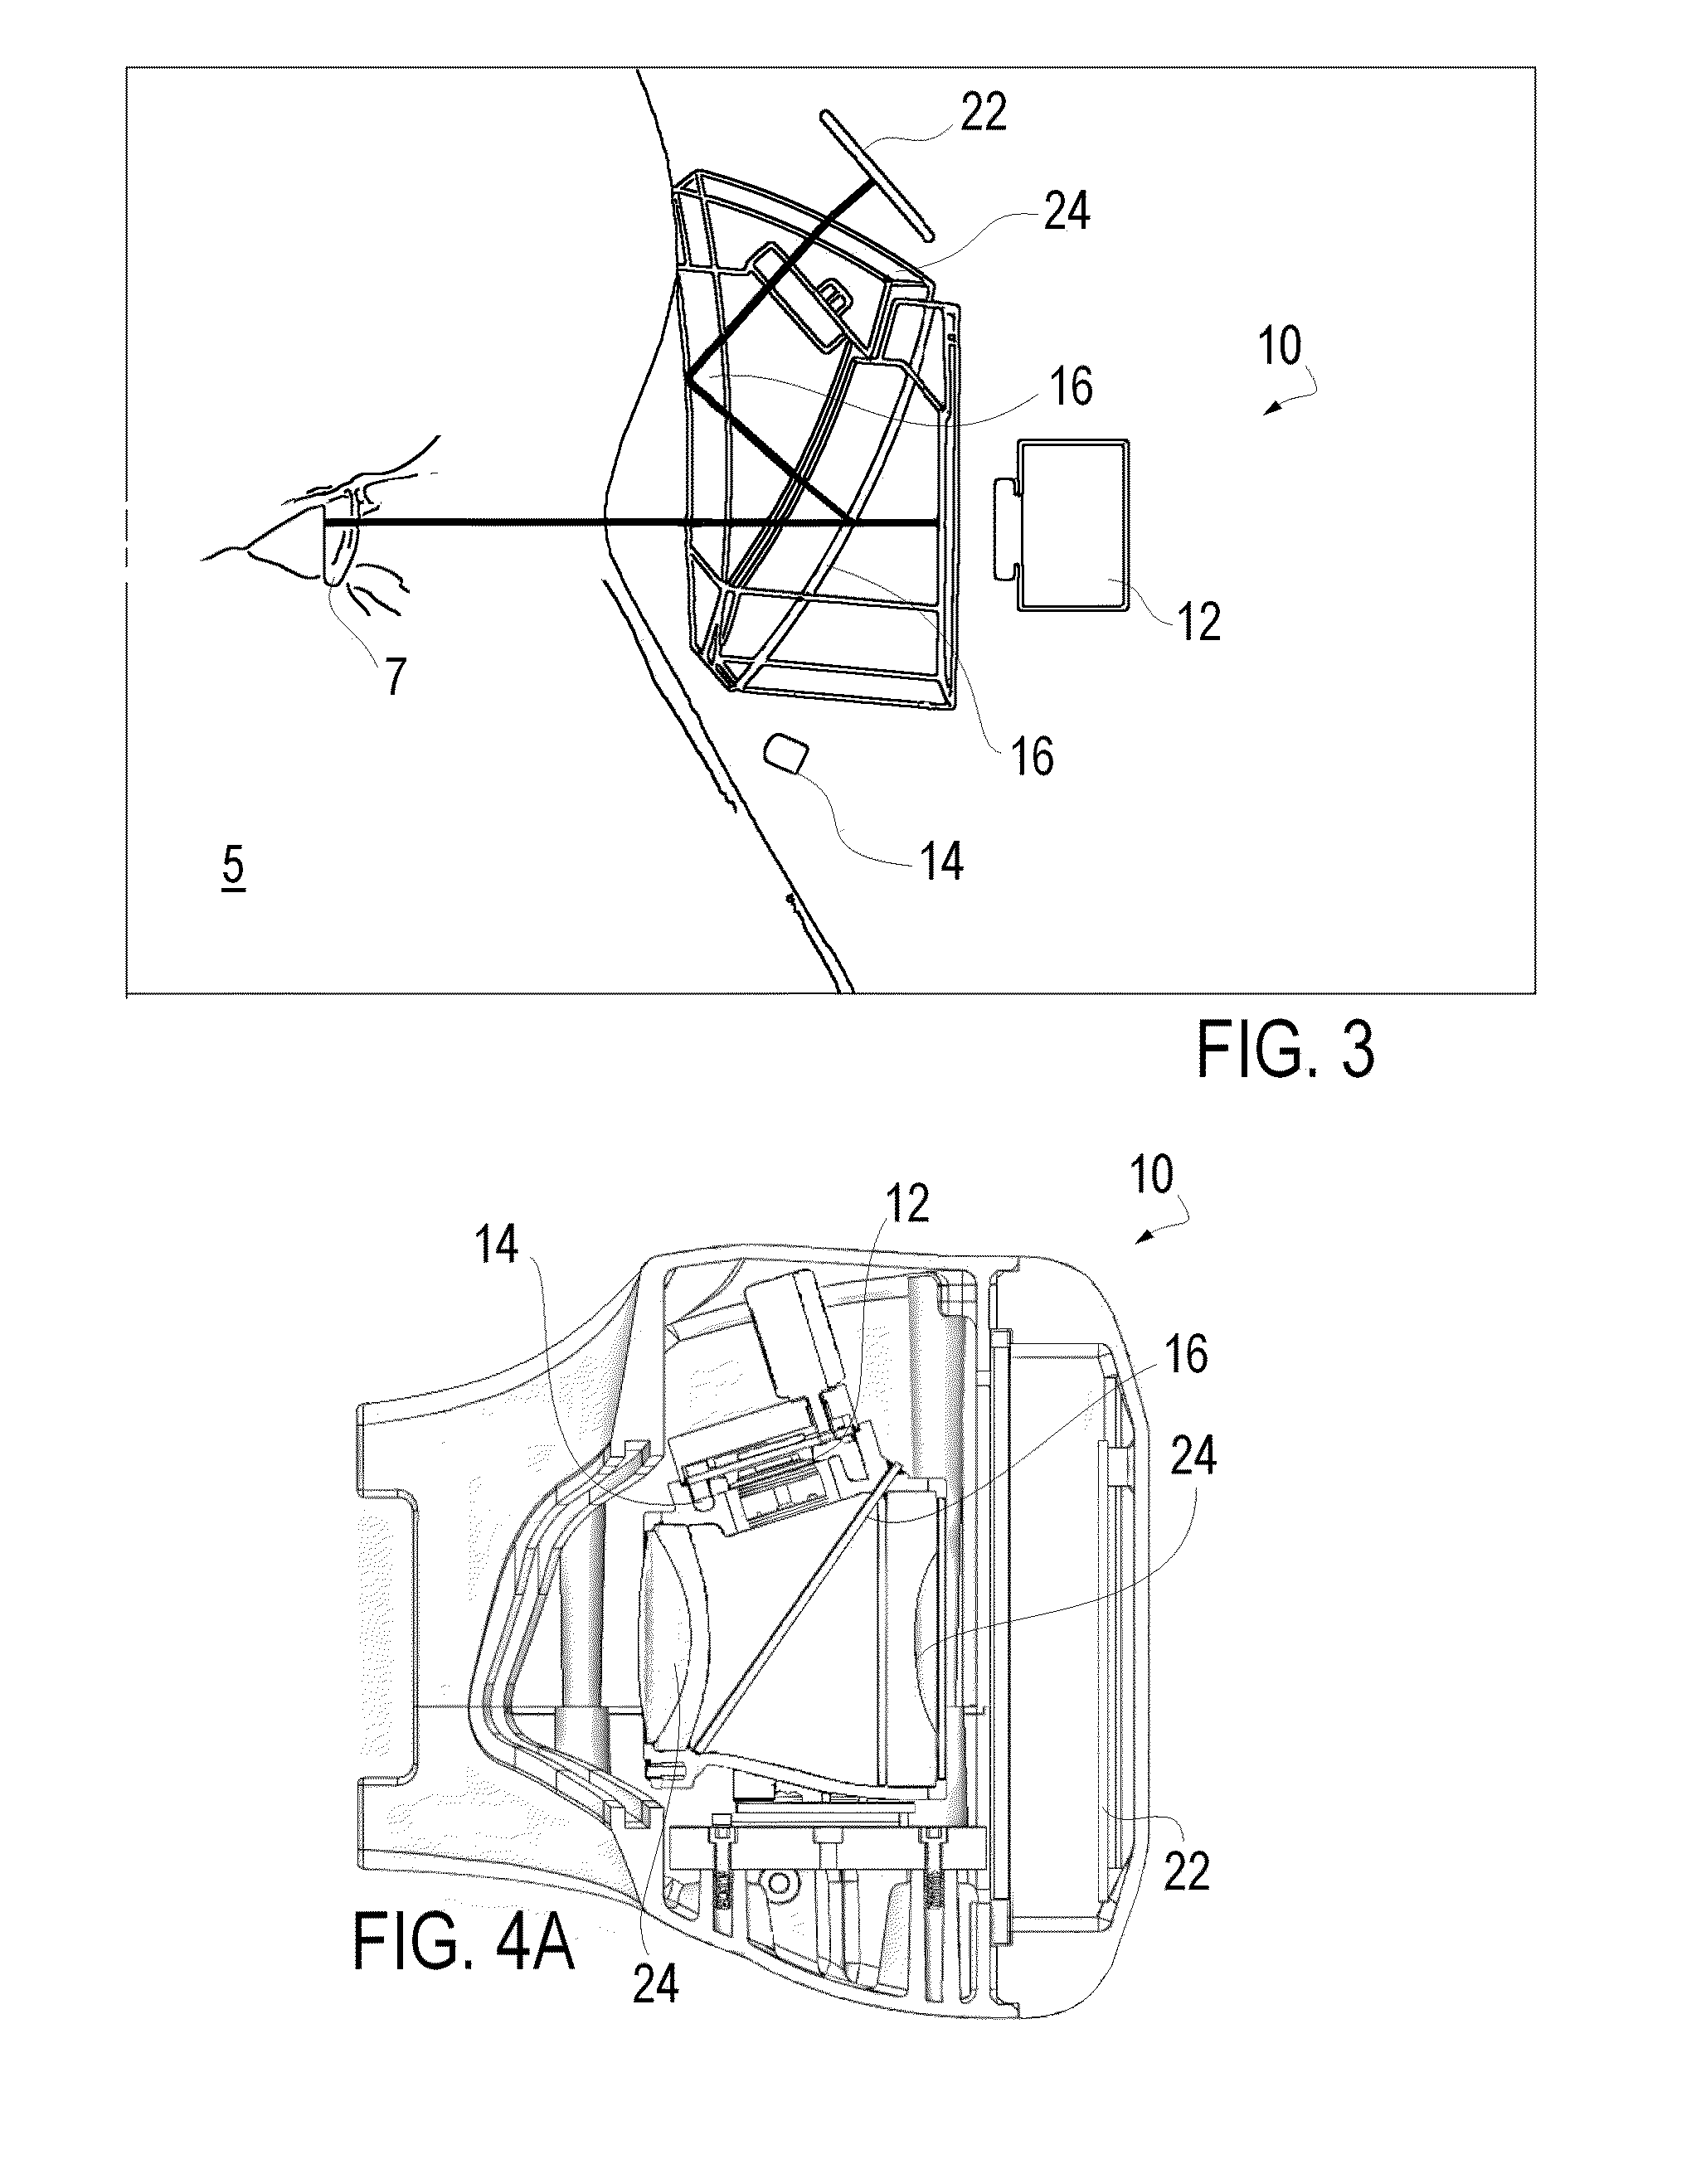 Method of measuring and analyzing ocular response in a subject using stable pupillary parameters with video oculography system